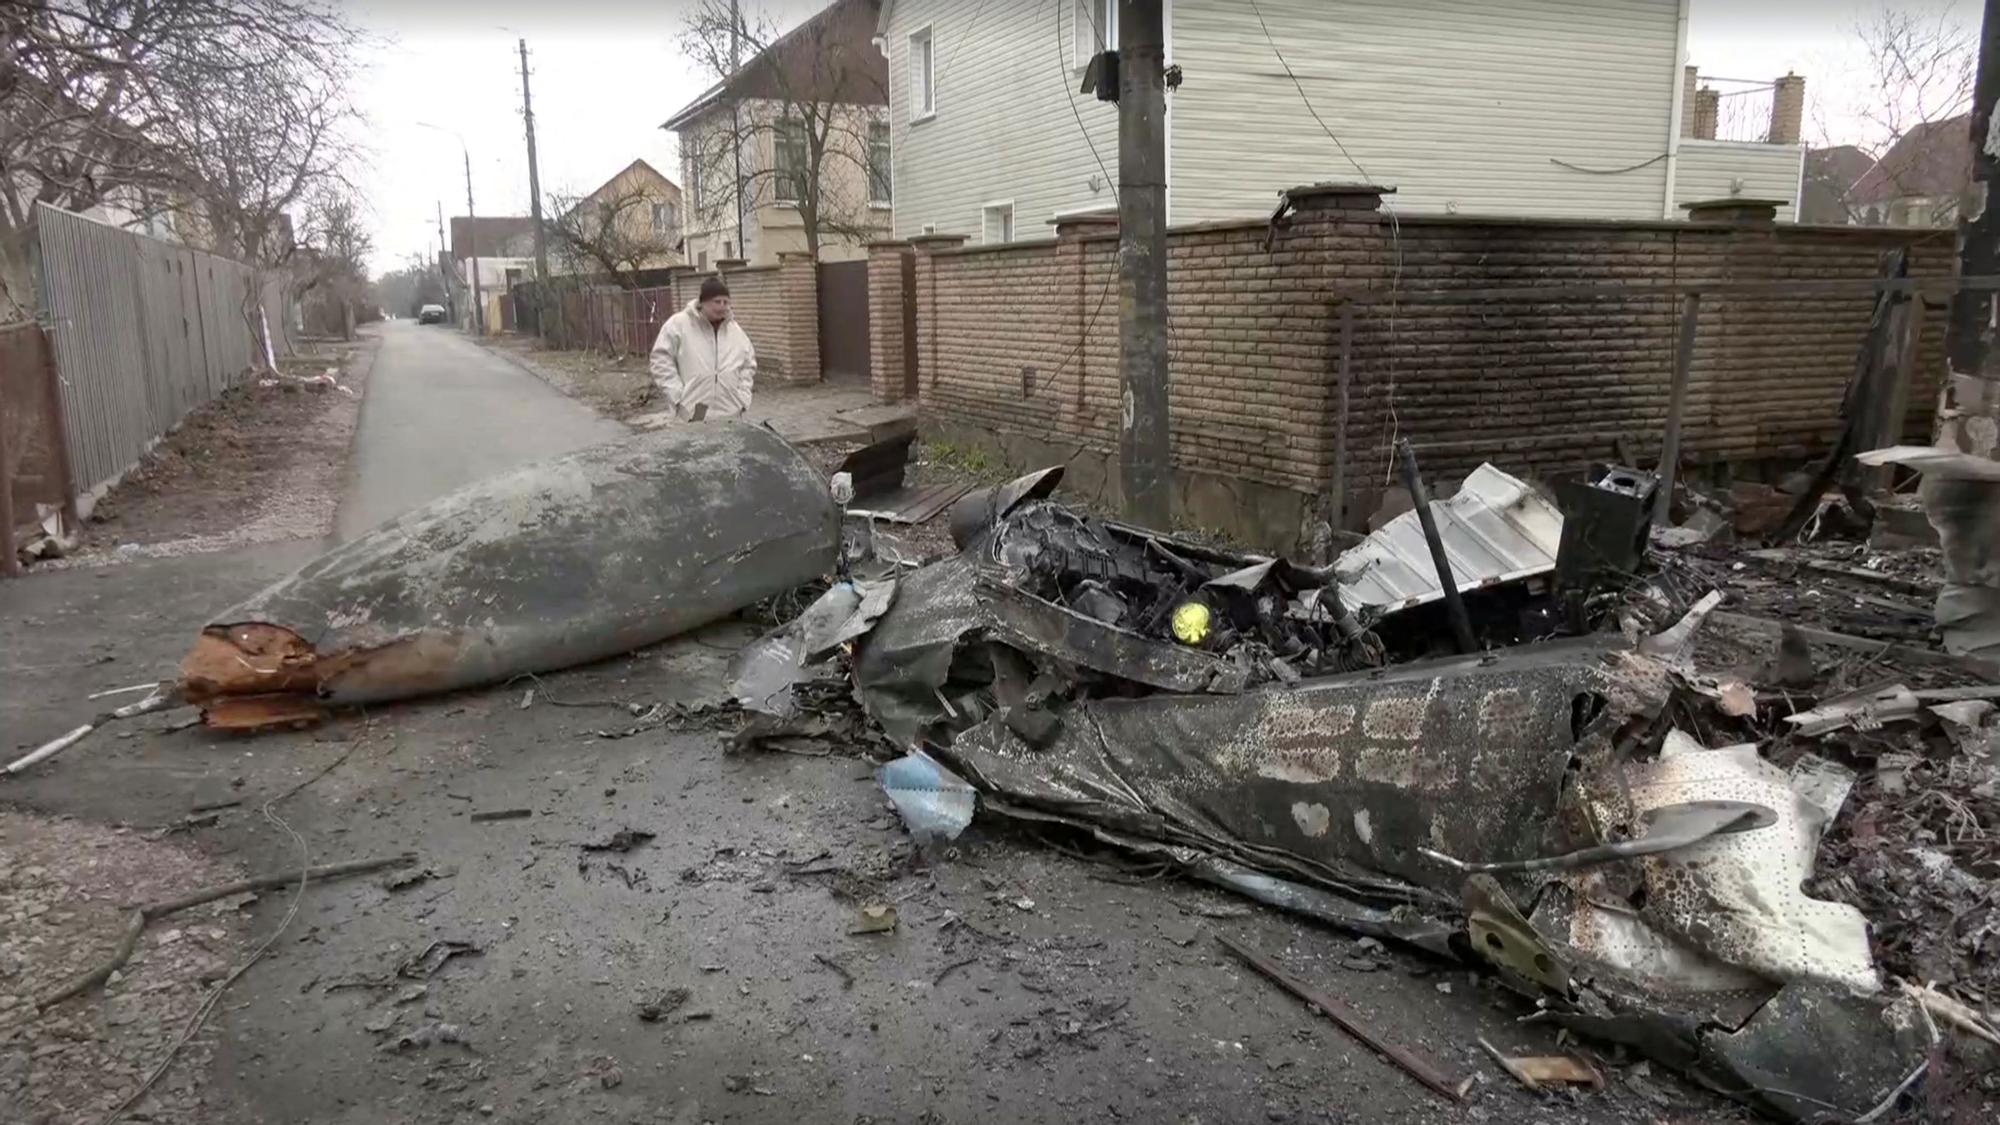 Screengrab from video shows plane crash after Russian invasion in Kyiv